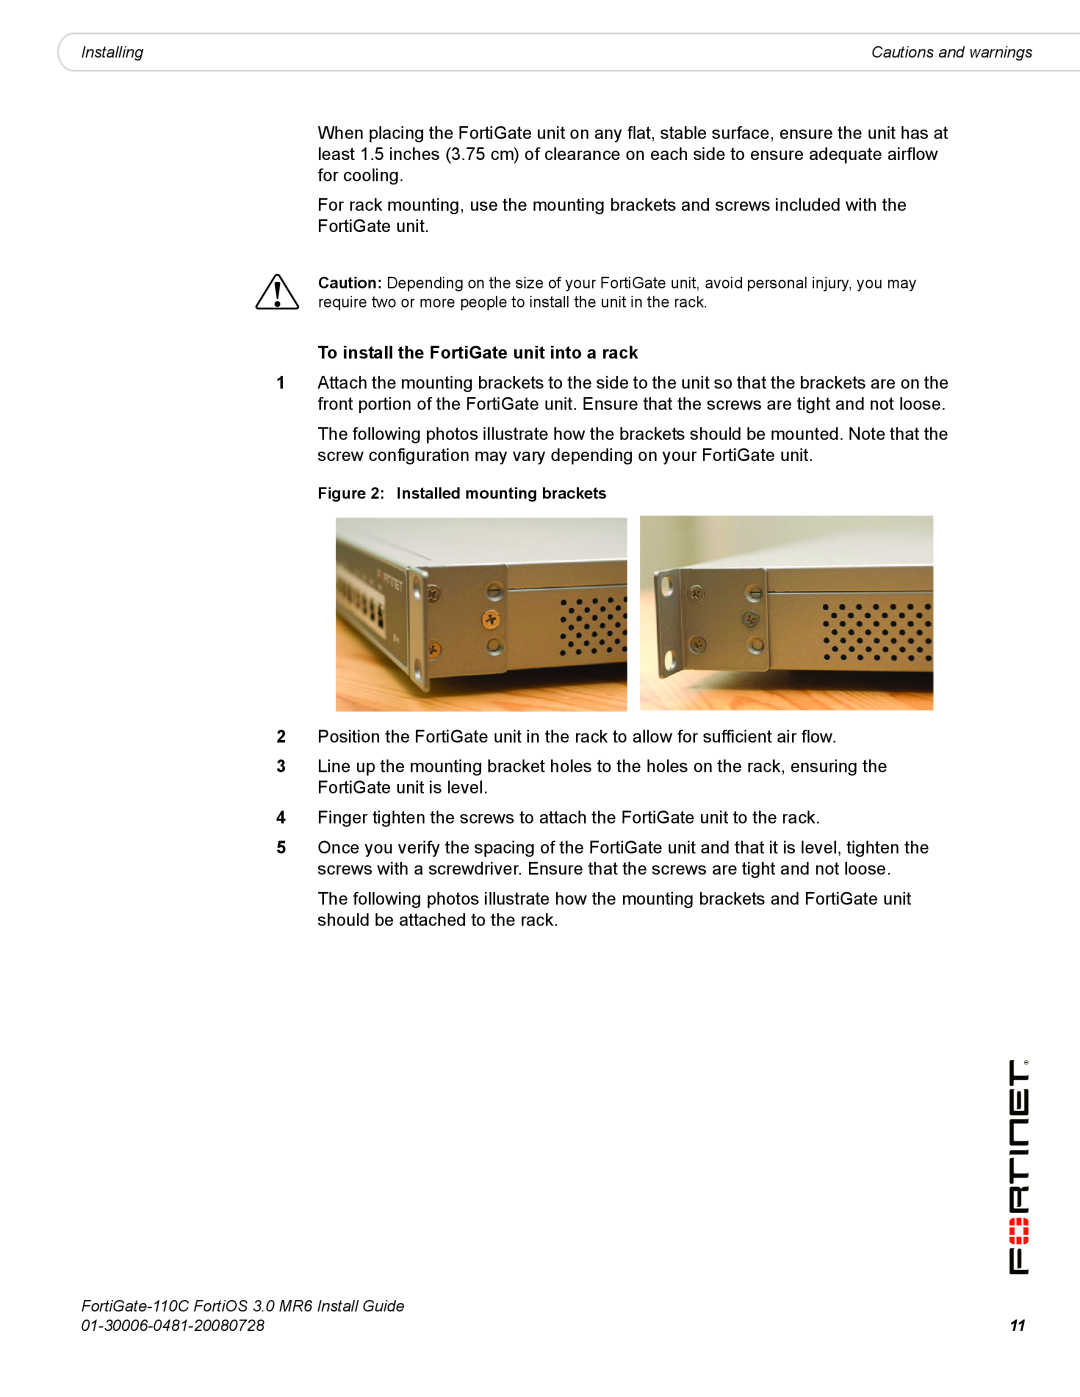 Fortinet 110C manual To install the FortiGate unit into a rack 